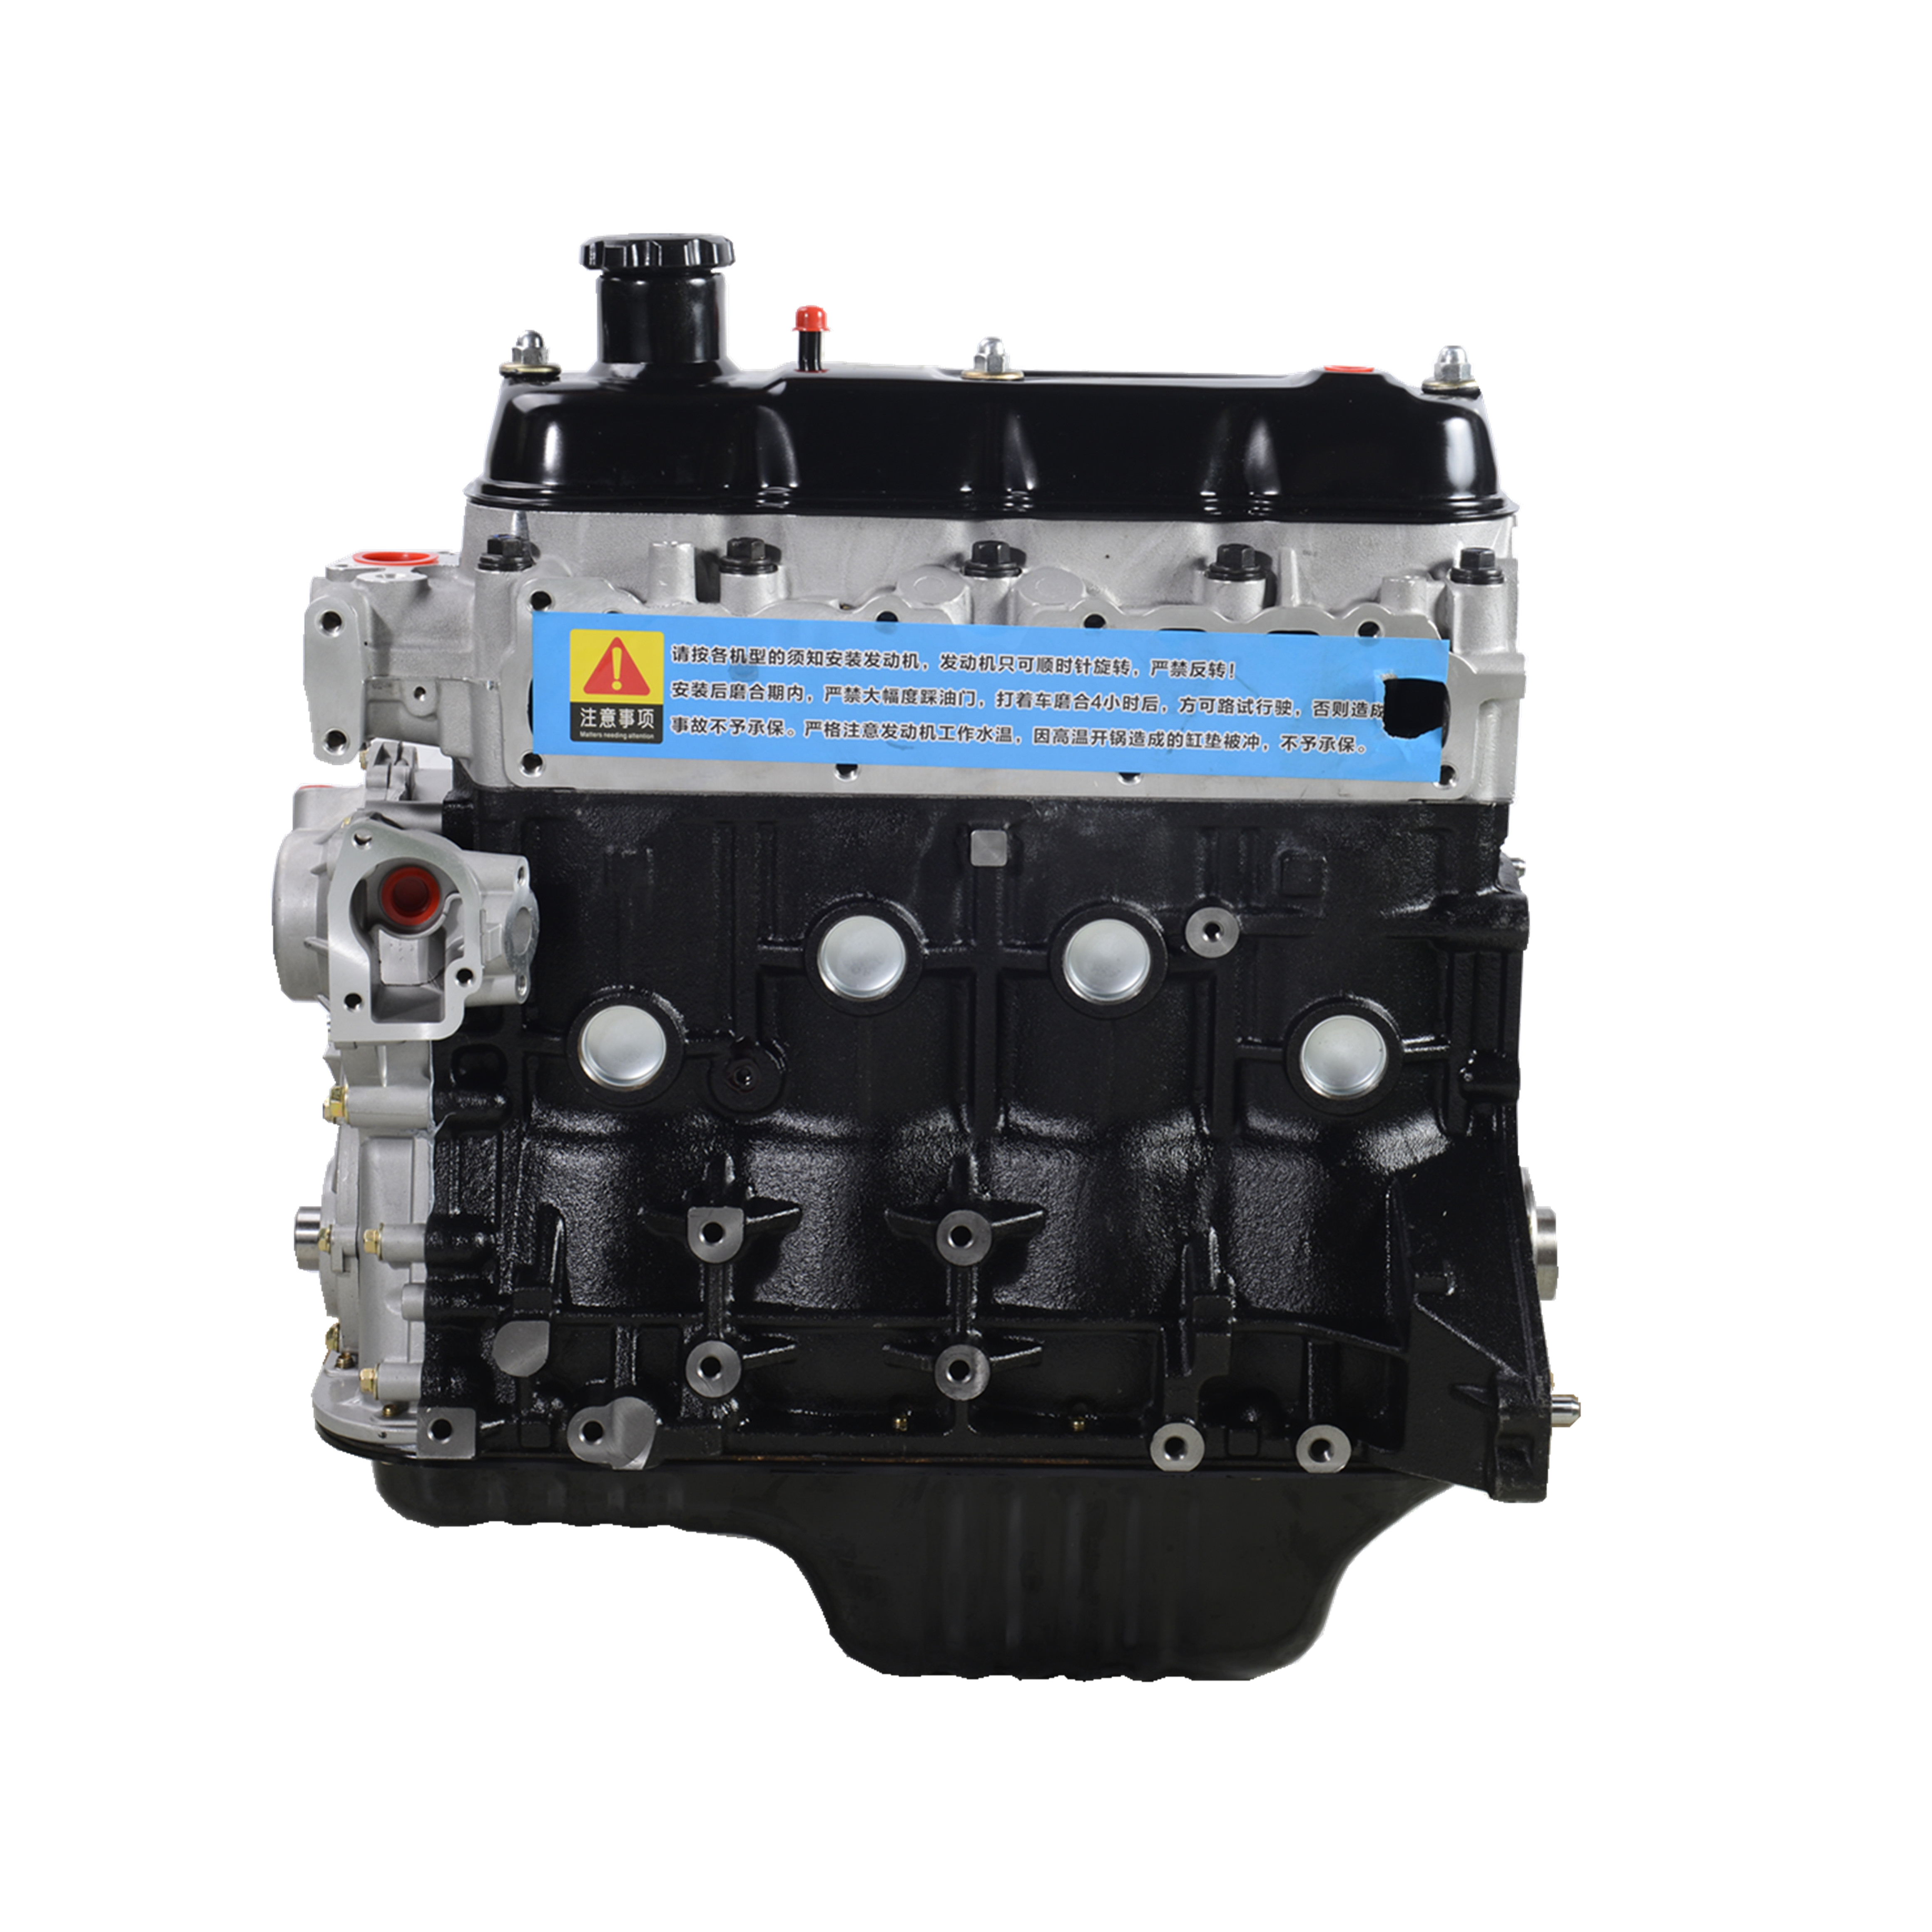 China Wholesale	Changhe Beidouxing (new model) engine-
 V19(V19) -donganautoparts